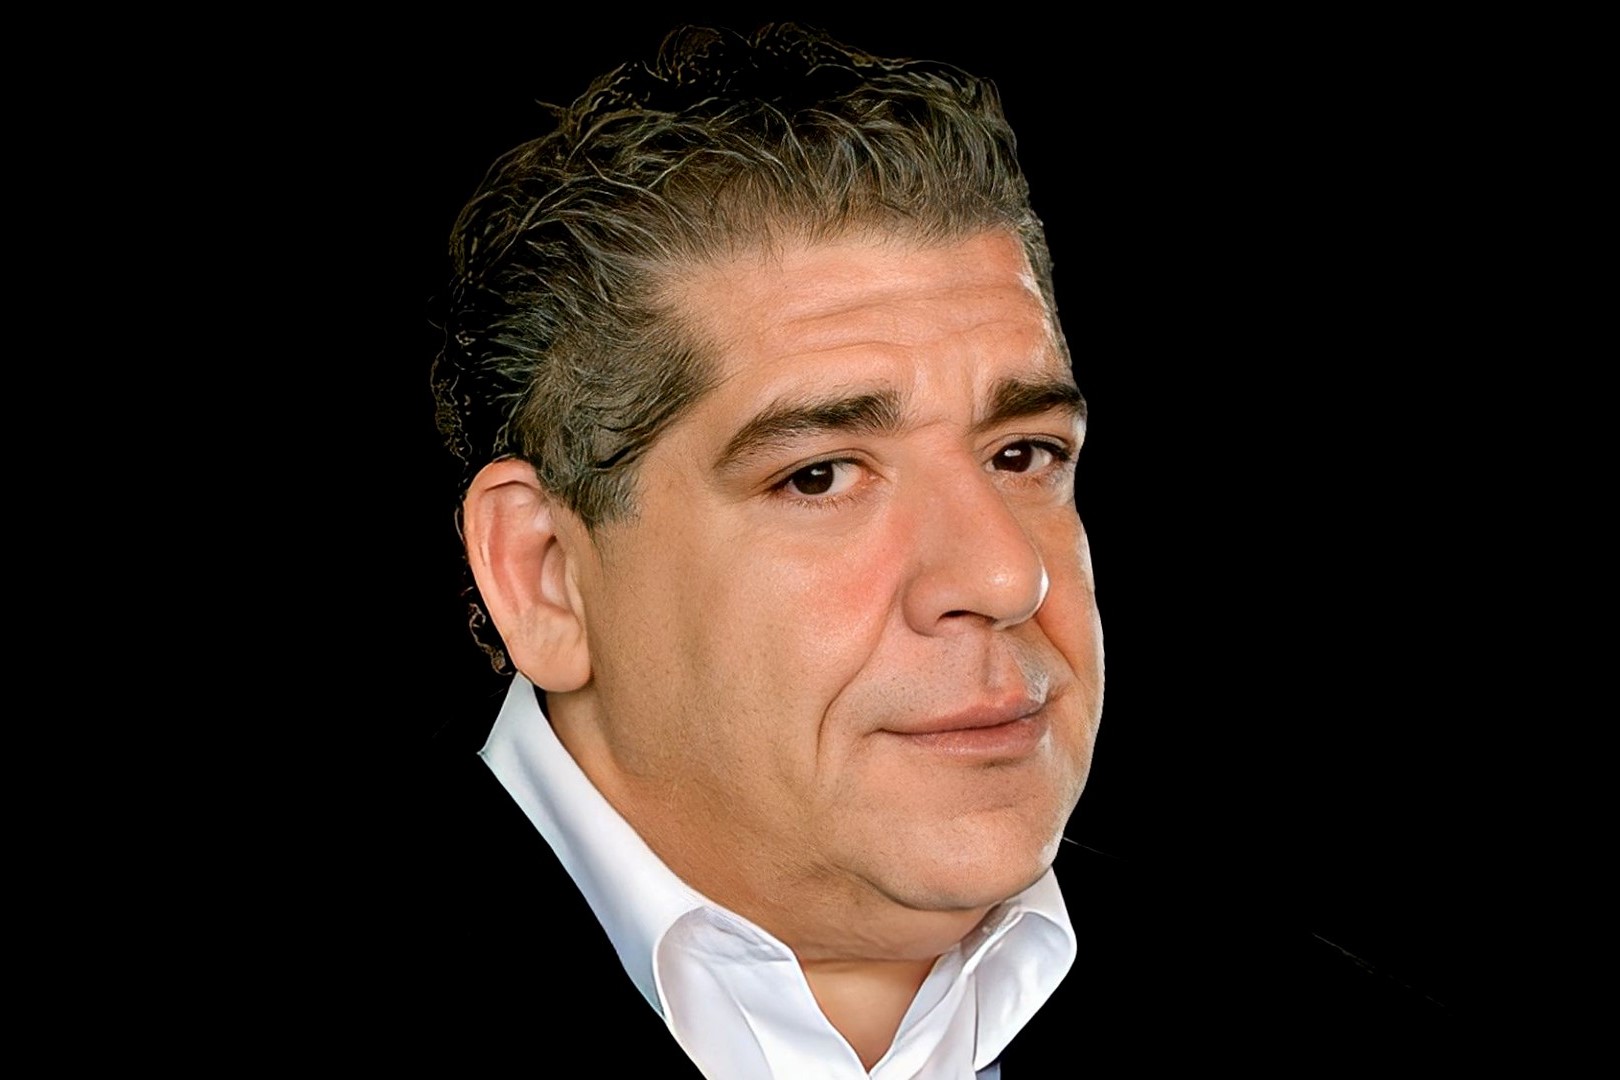 Joey Diaz’s Mind-Blowing Earnings Revealed! You Won’t Believe How Much He Makes!